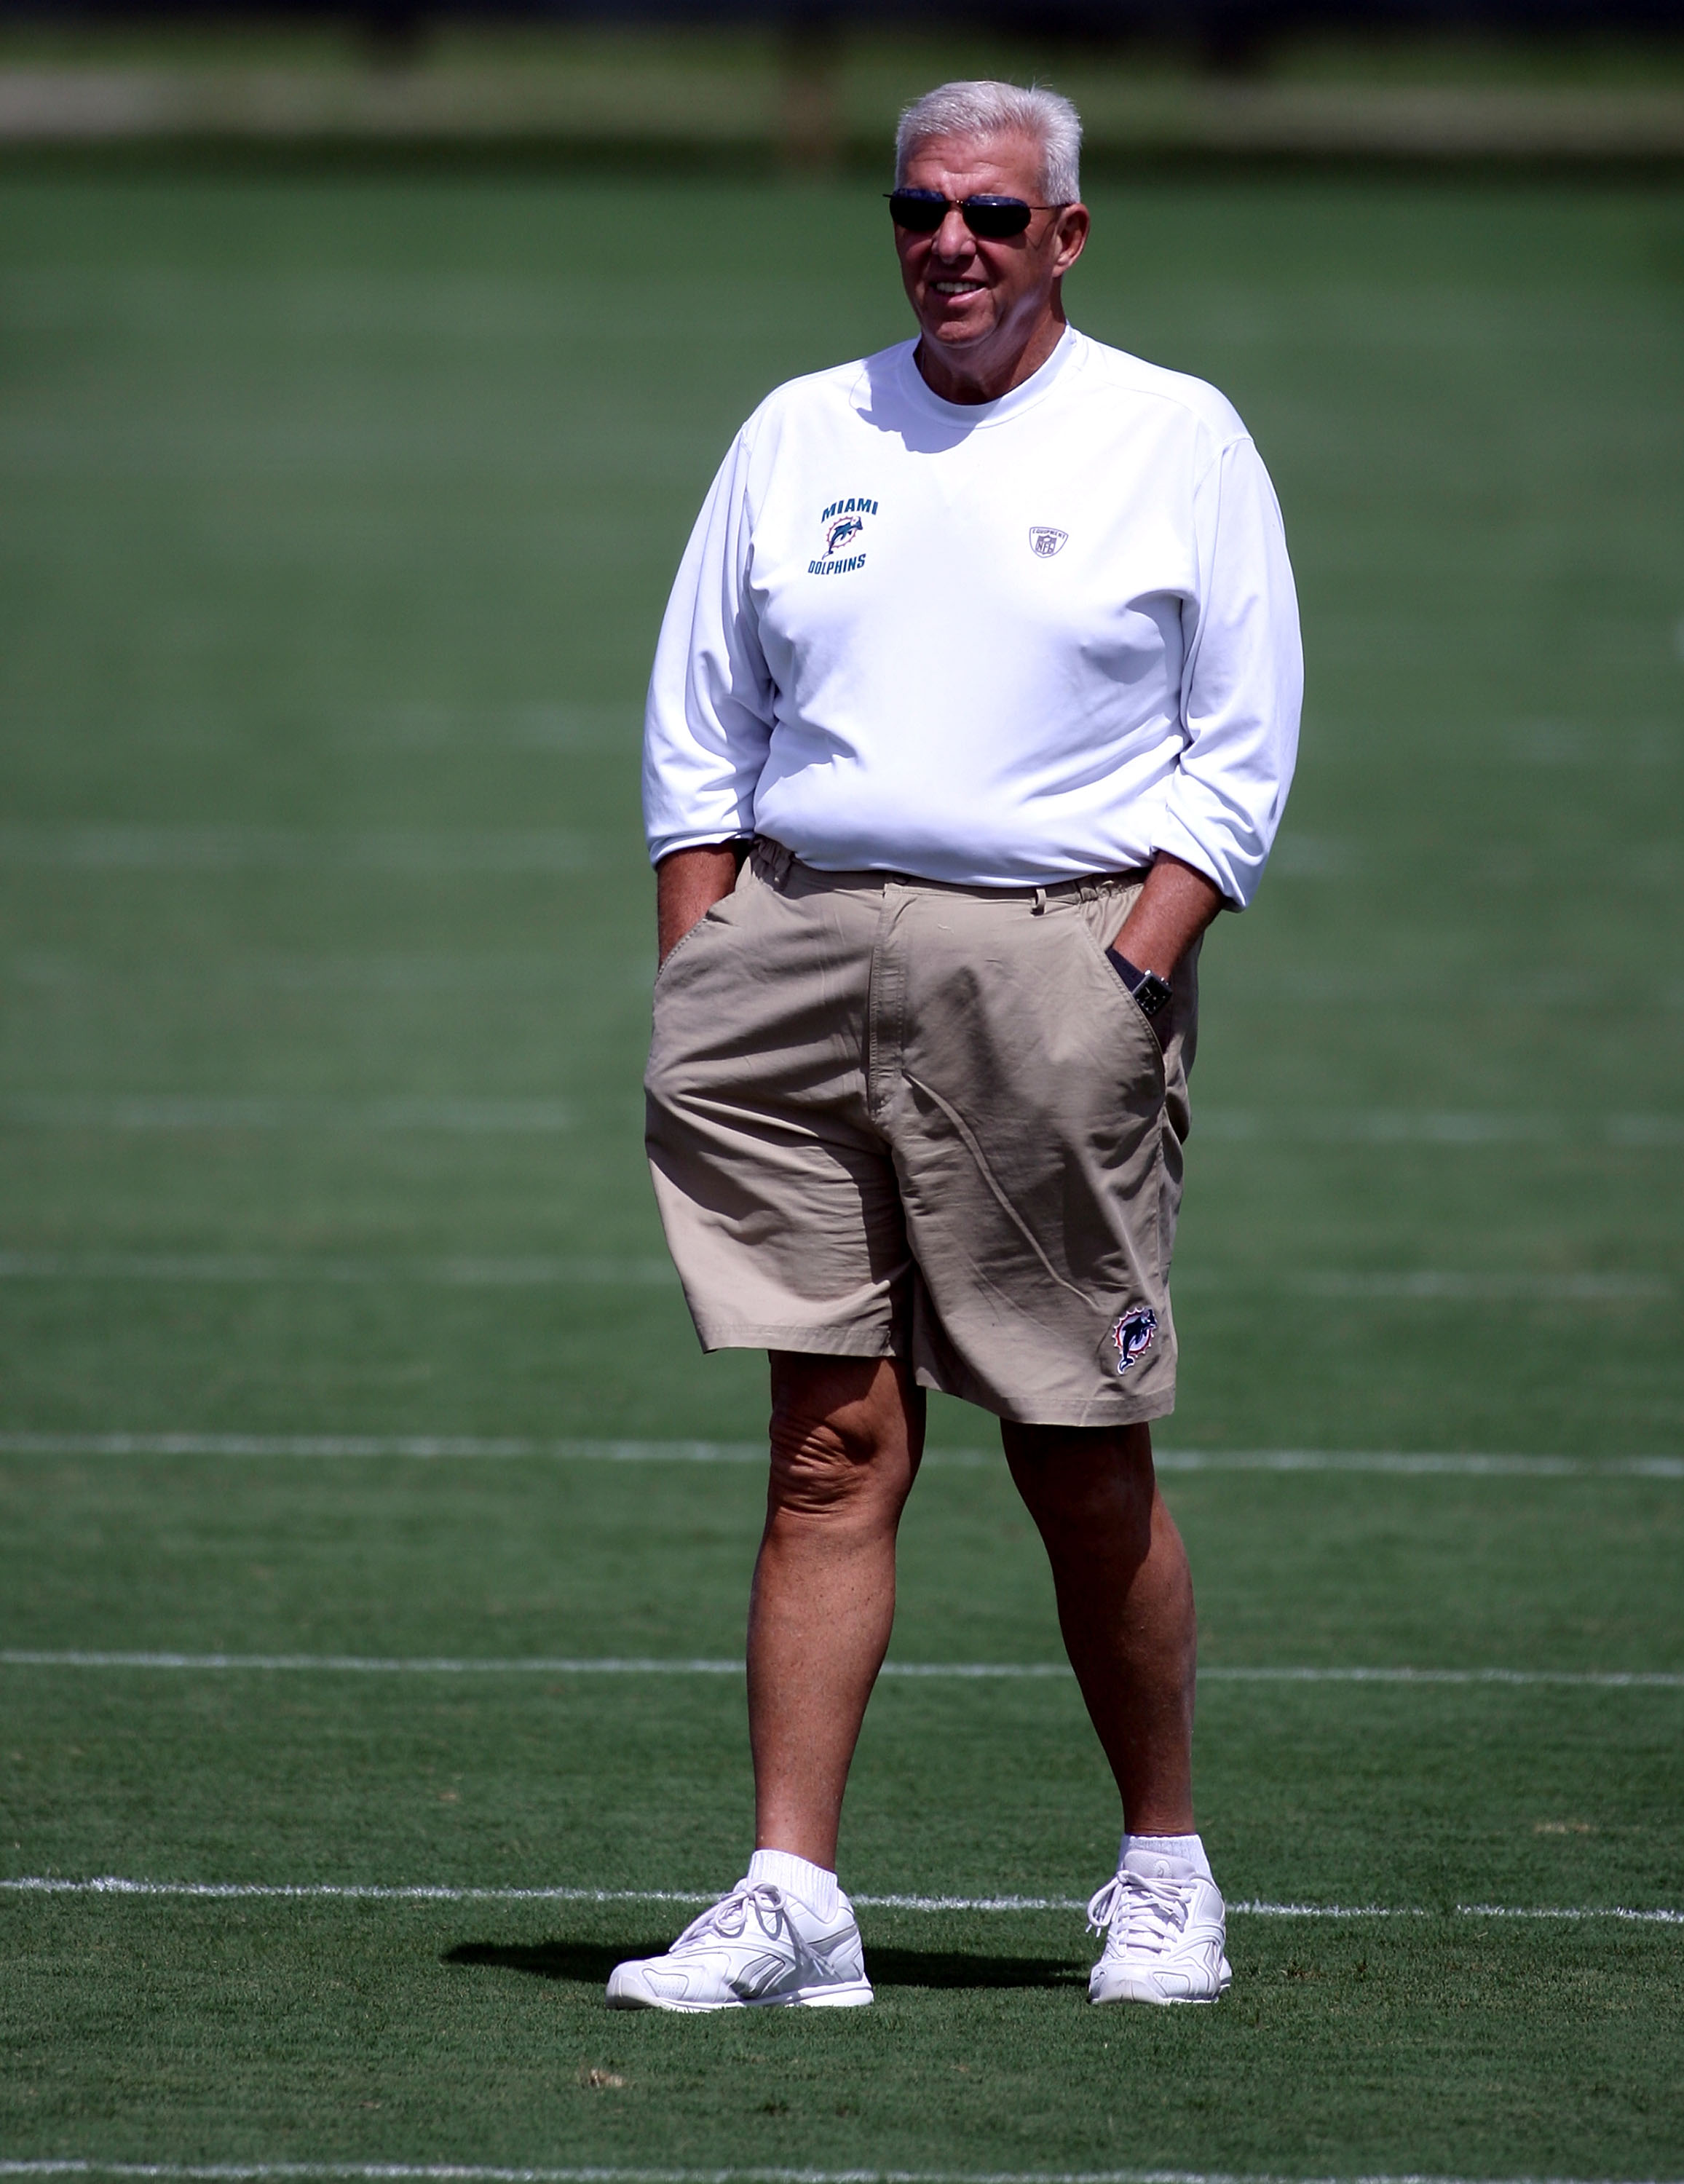 DAVIE, FL - JUNE 06:  Executive Vice President of Football Operations Bill Parcells watches practice on during Miami Dolphins Mini Camp on June 6, 2008 at the Dolphins practice facility in Davie, Florida.  (Photo by Marc Serota/Getty Images)